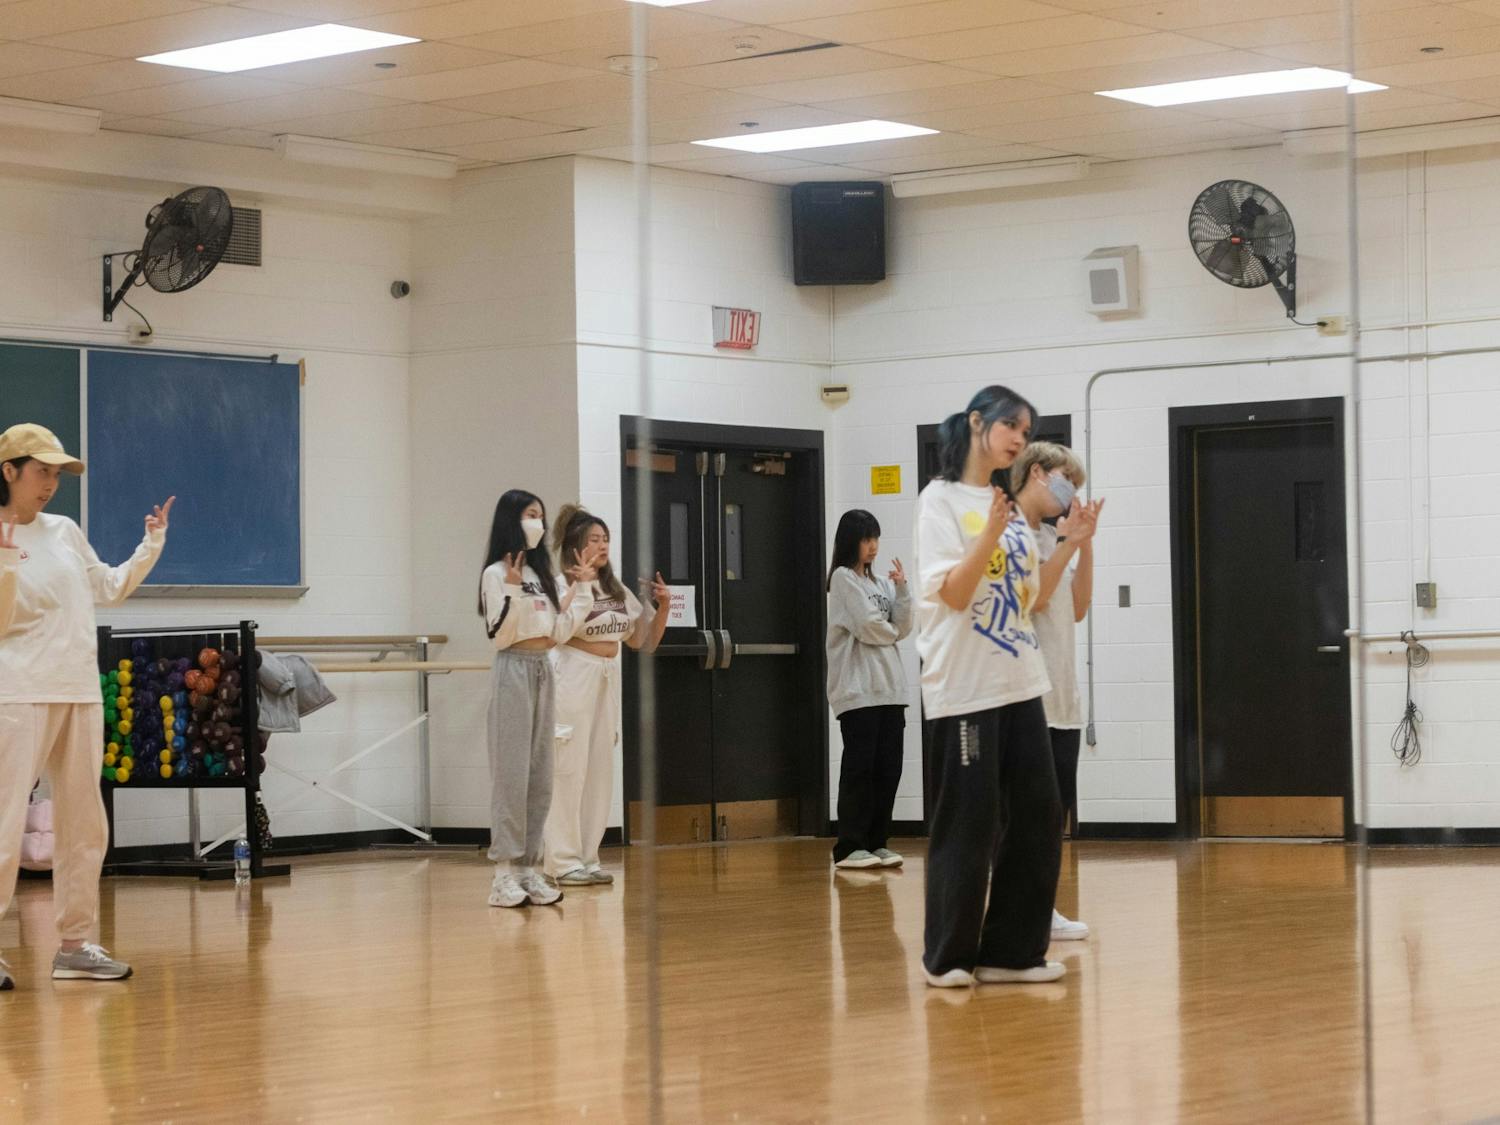 Mix’n’Max, an exclusively Asian K-Pop dance group on campus, provides a space for students of all skill levels to learn choreography and bond through the art form.&nbsp;